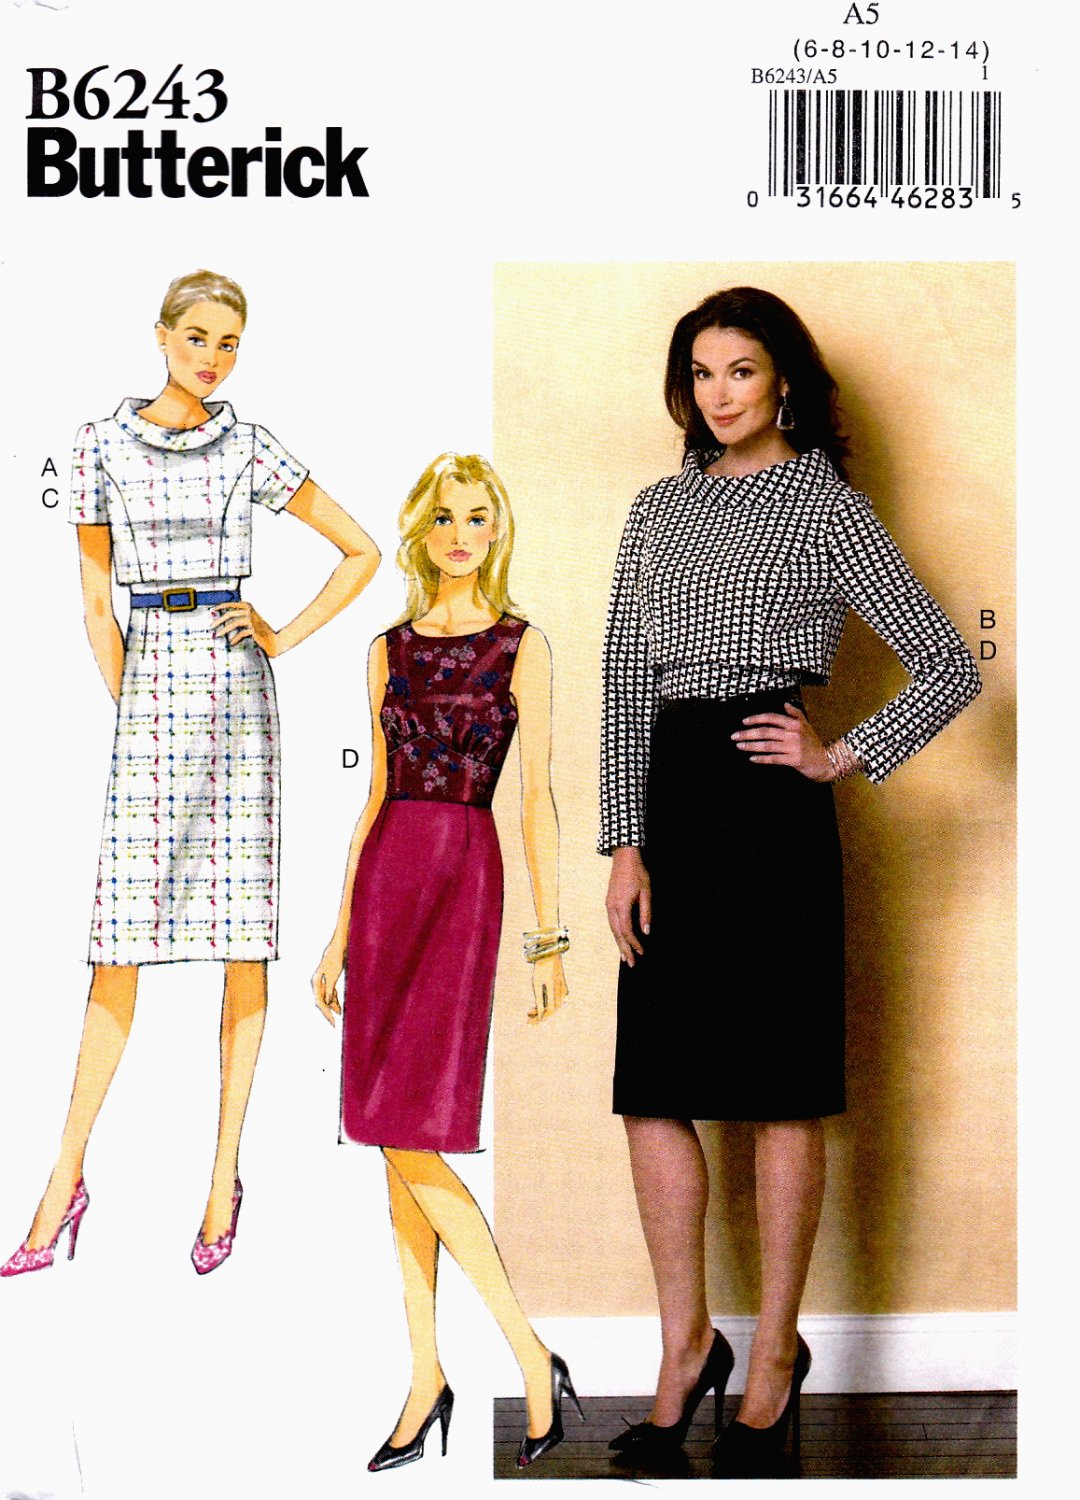 Butterick B6243 Misses Jacket and Dress Sewing Pattern Sizes 6-8-10-12-14